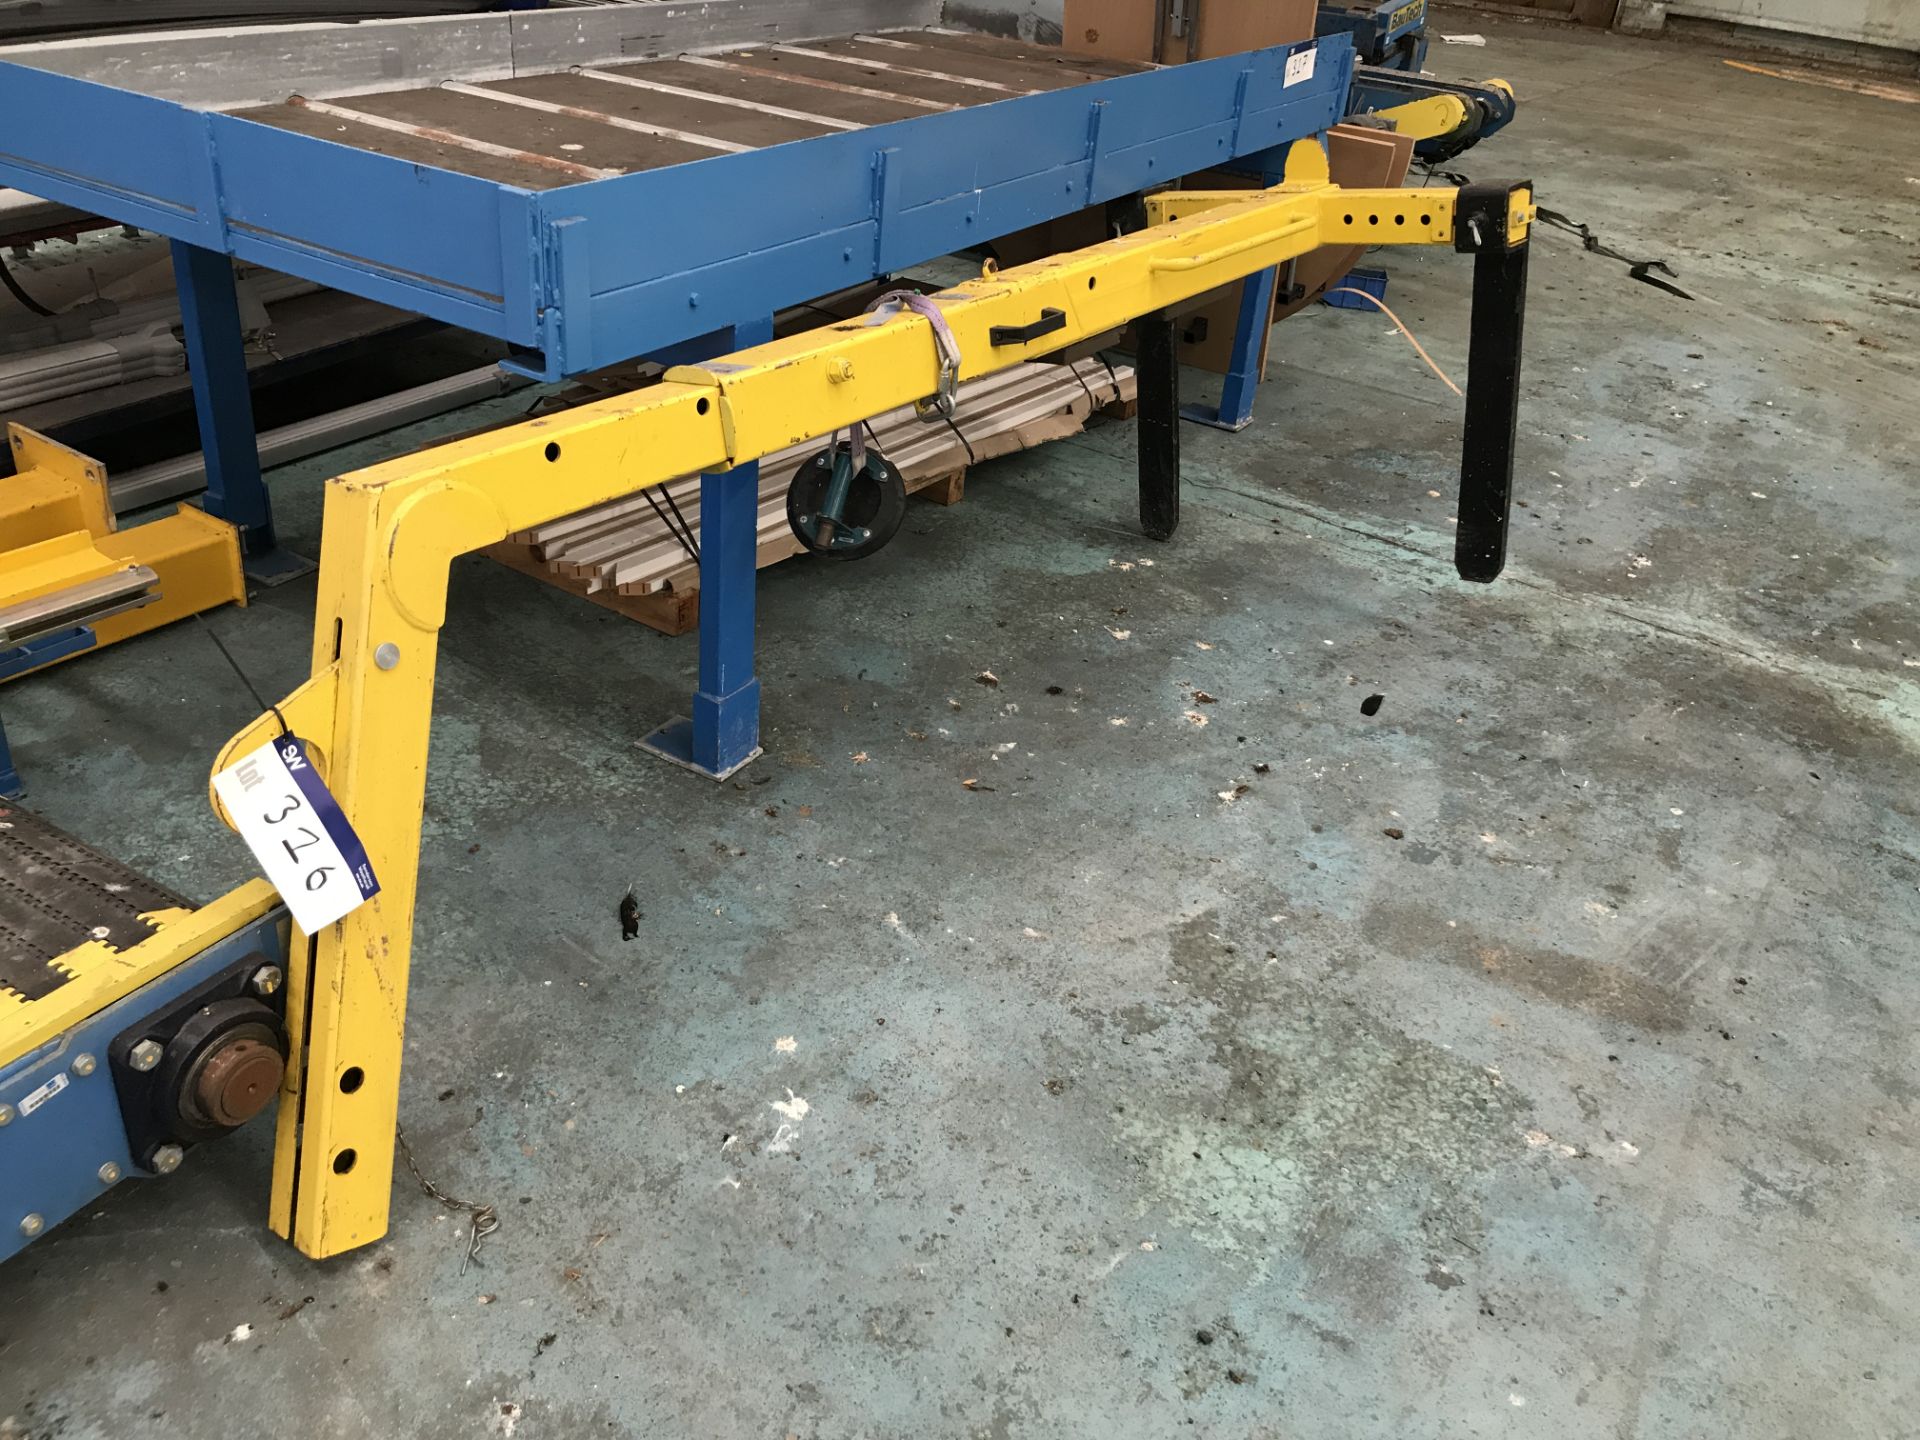 RHC Lifting Limited 11-921 350kg SWL Crane Pallet Lift, serial no. 12578, year of manufacture 2011